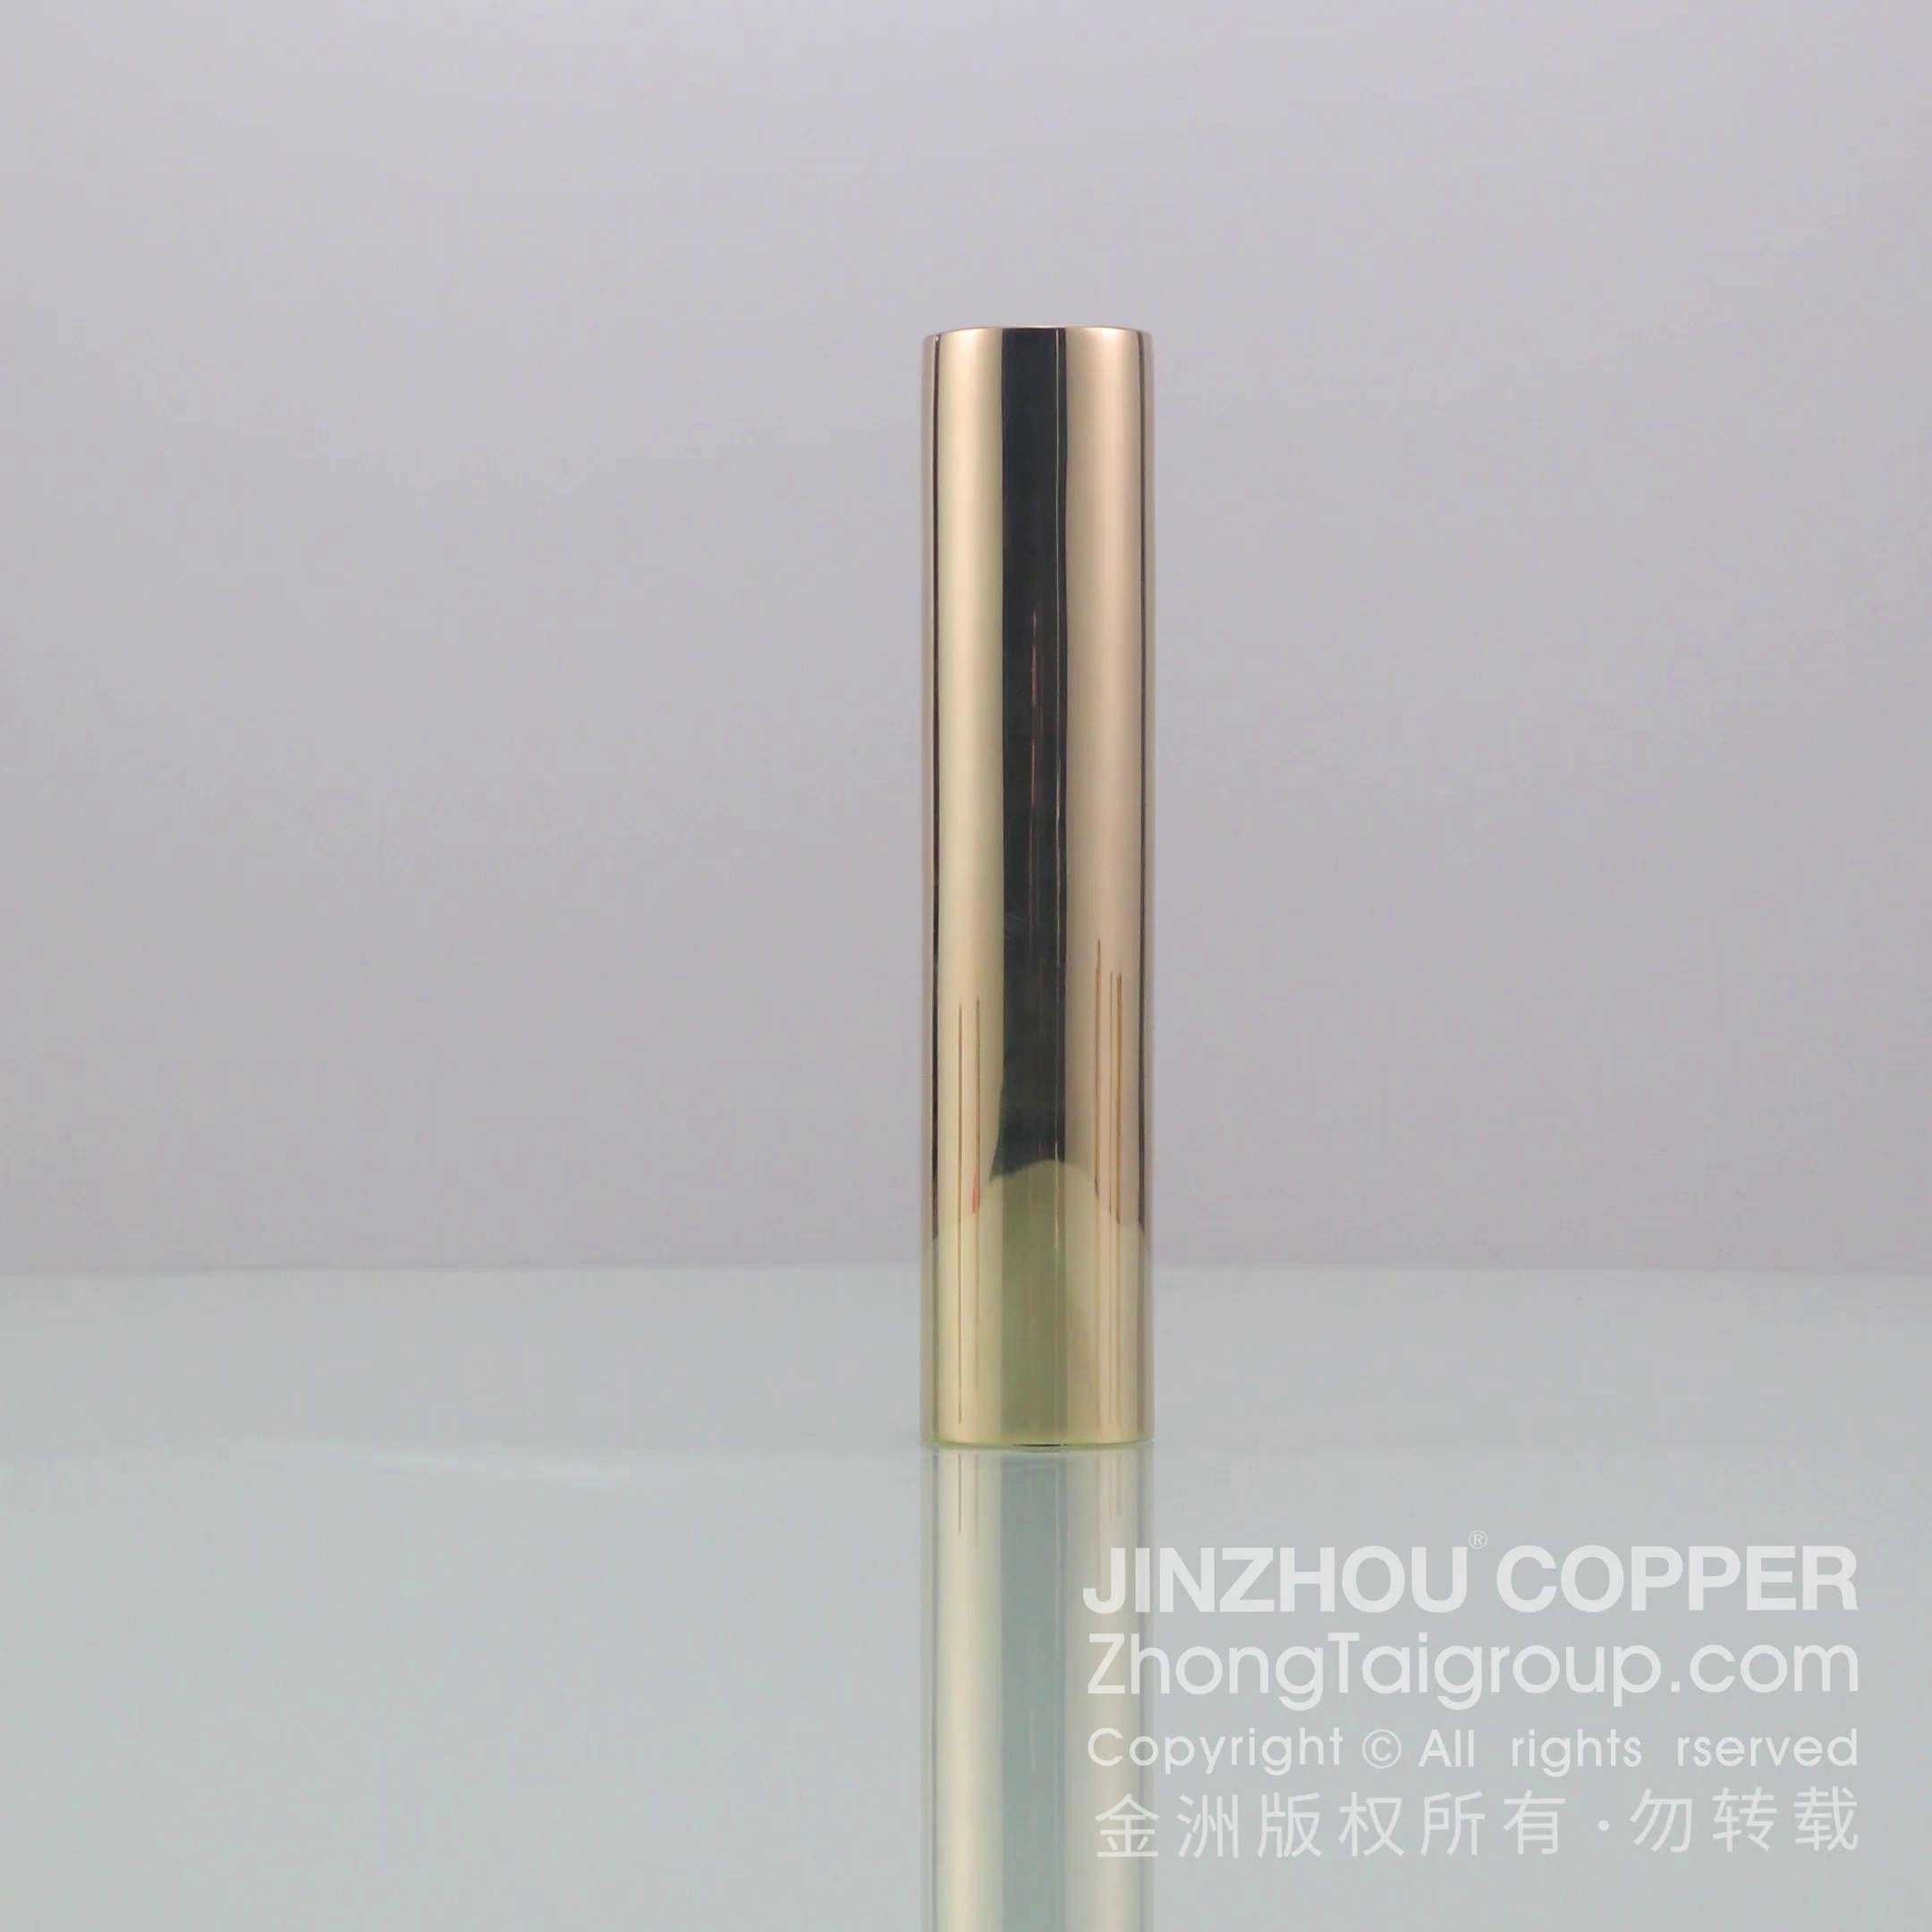 shaped copper rod export, shaped copper rod china, shaped copper rod distributor, shaped copper rod company